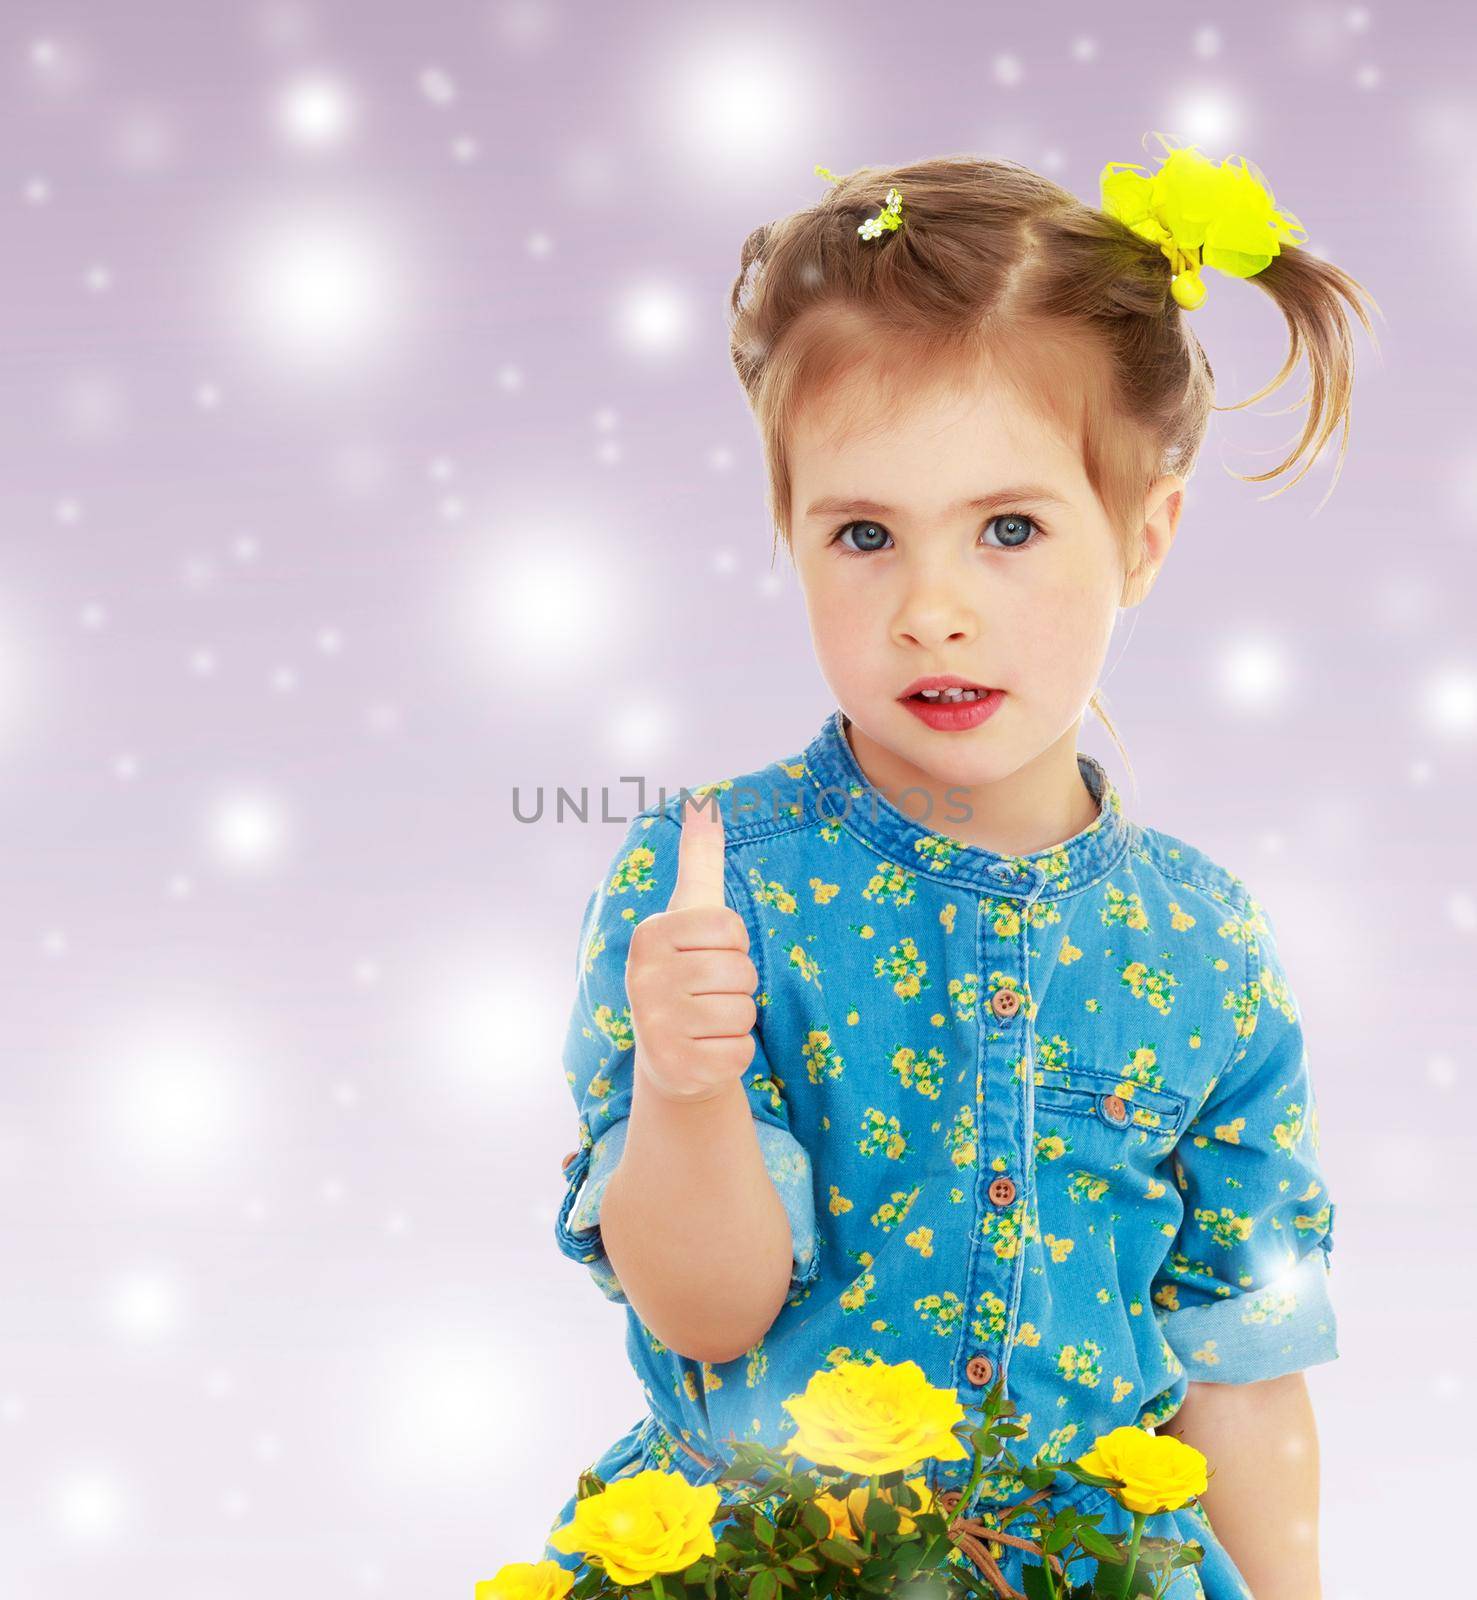 Cute little girl in a blue dress. The girl shows the thumb of the right hand. Before her a bouquet of yellow flowers.On new year purple background with white snowflakes.